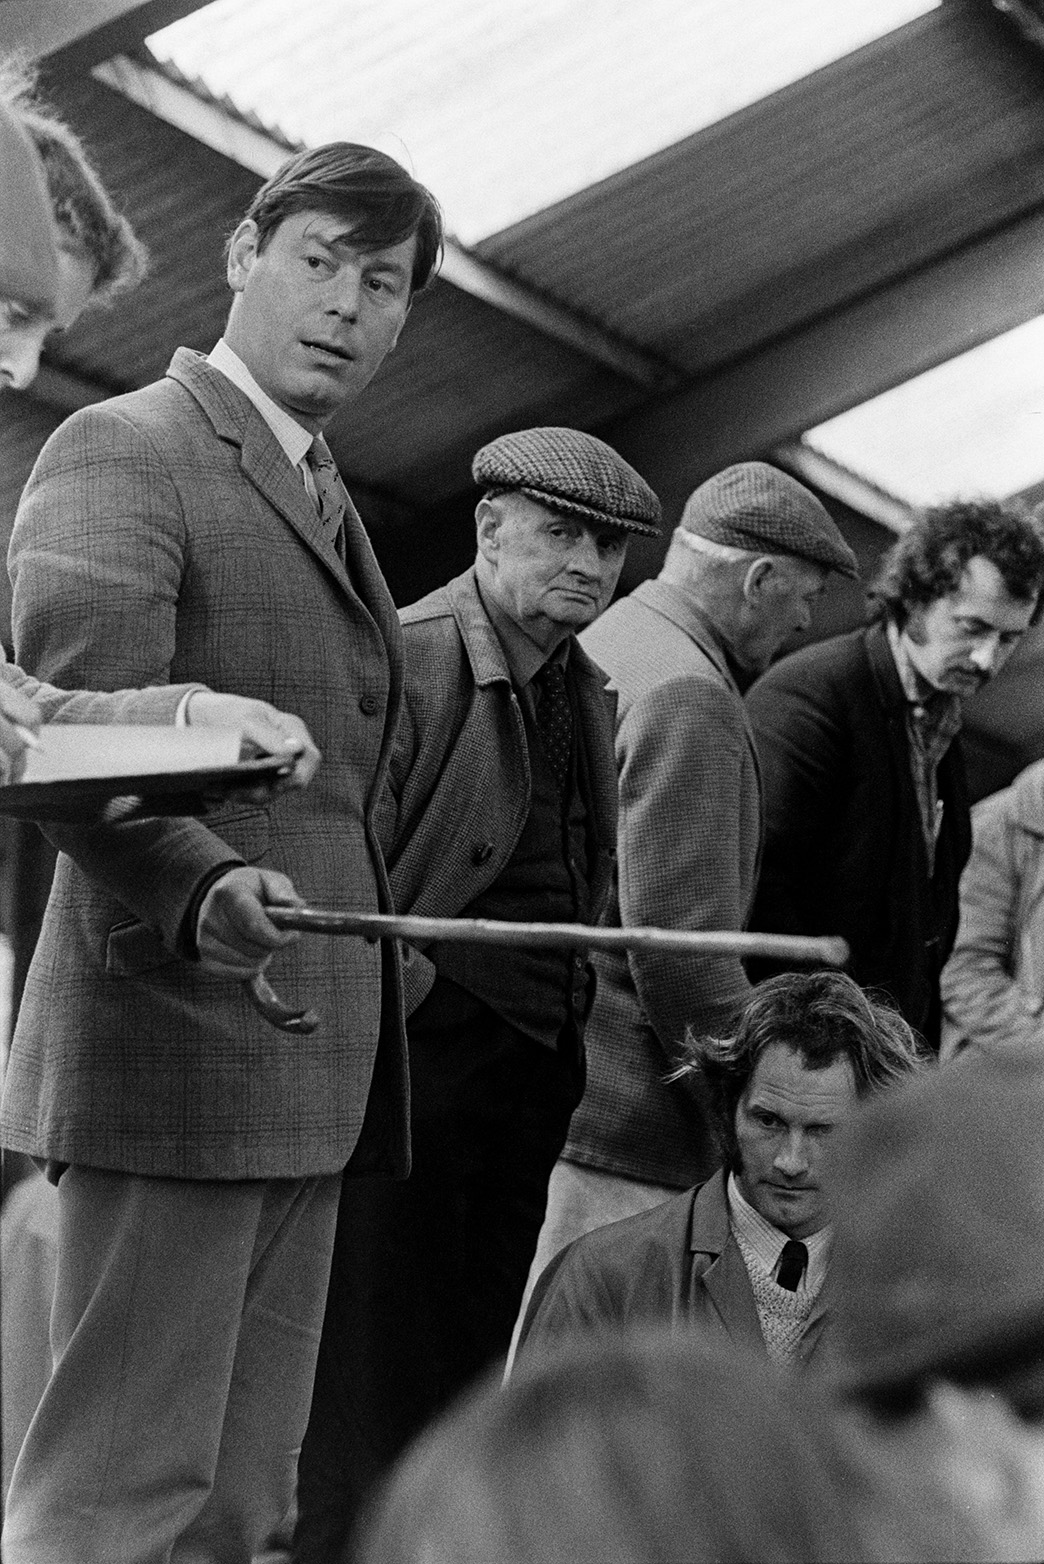 Hatherleigh Market. Men stood on boards above sheep pens and looking at the livestock below. The man holding a walking stick is possibly the auctioneer.